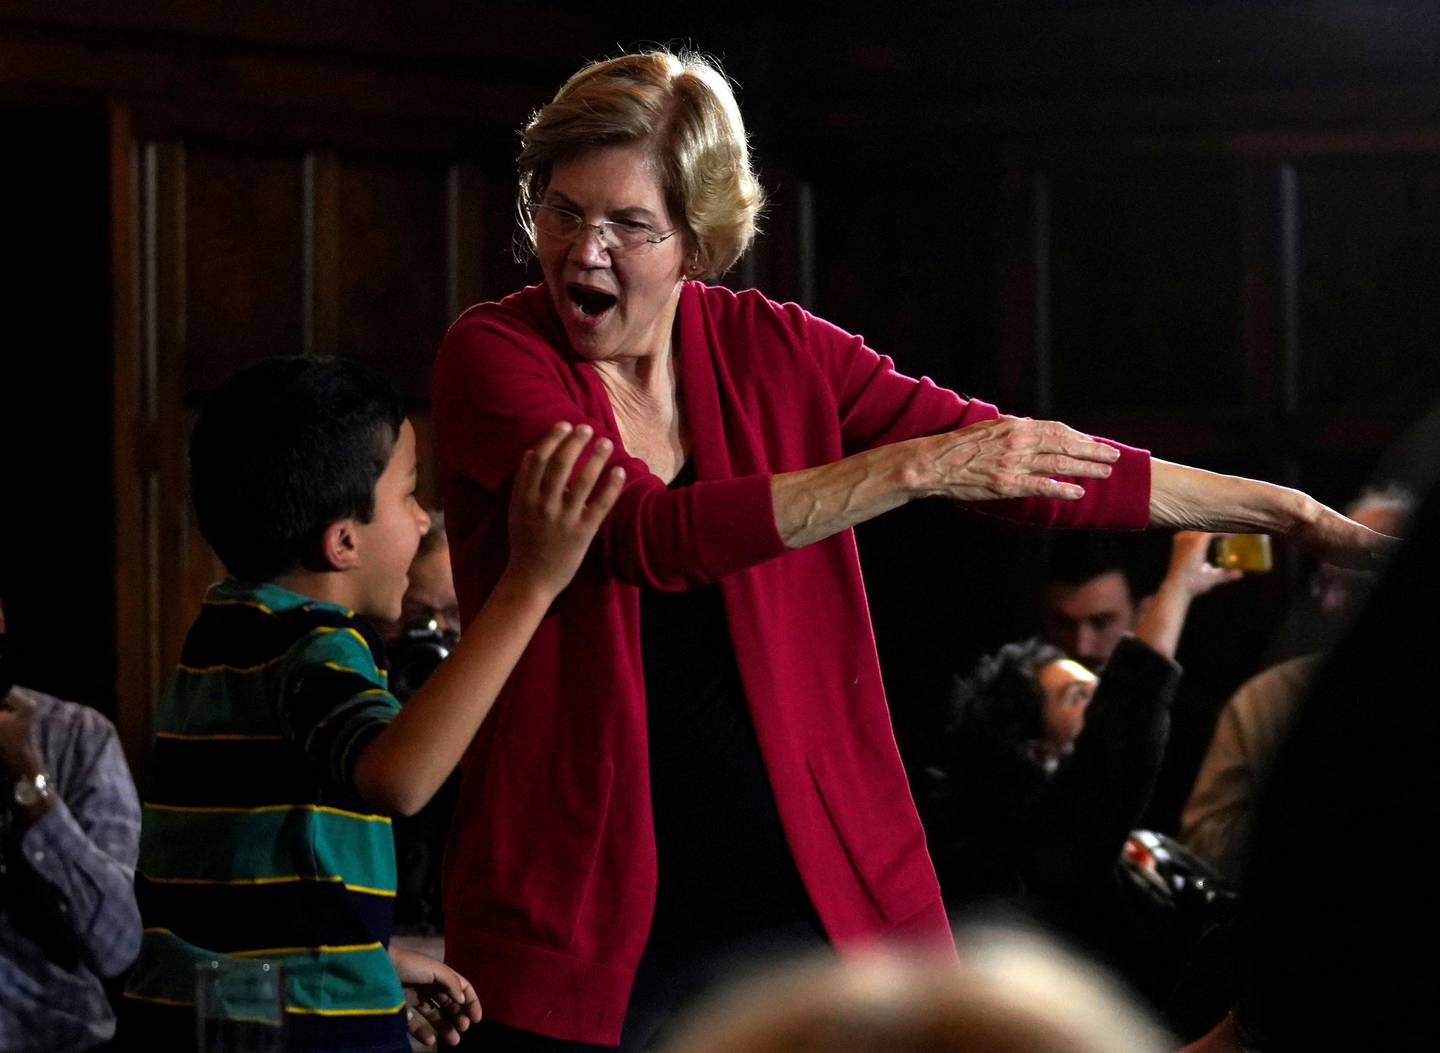 Democratic 2020 U.S. presidential candidate and U.S. Senator Elizabeth Warren (D-MA) dances with a boy at a campaign event in Ames, Iowa, U.S., February 2, 2020. REUTERS/Rick Wilking     TPX IMAGES OF THE DAY